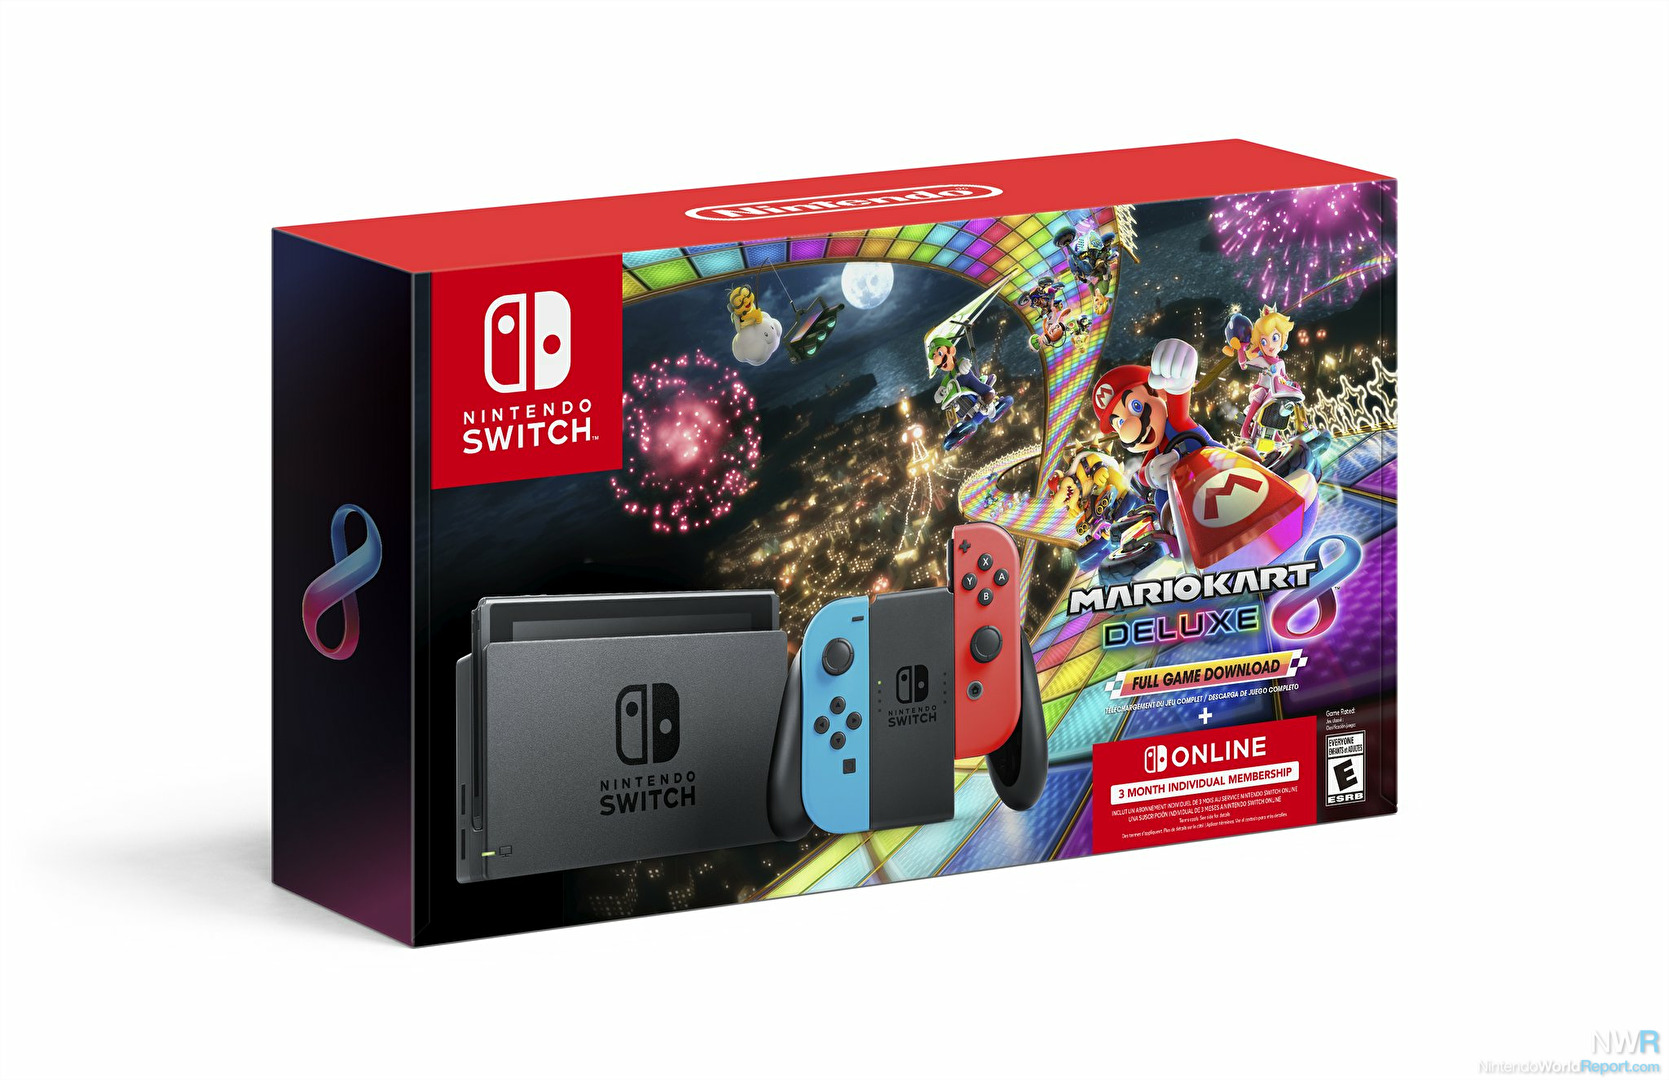 Nintendo Switch October Releases Outlet, 57% OFF | xevietnam.com